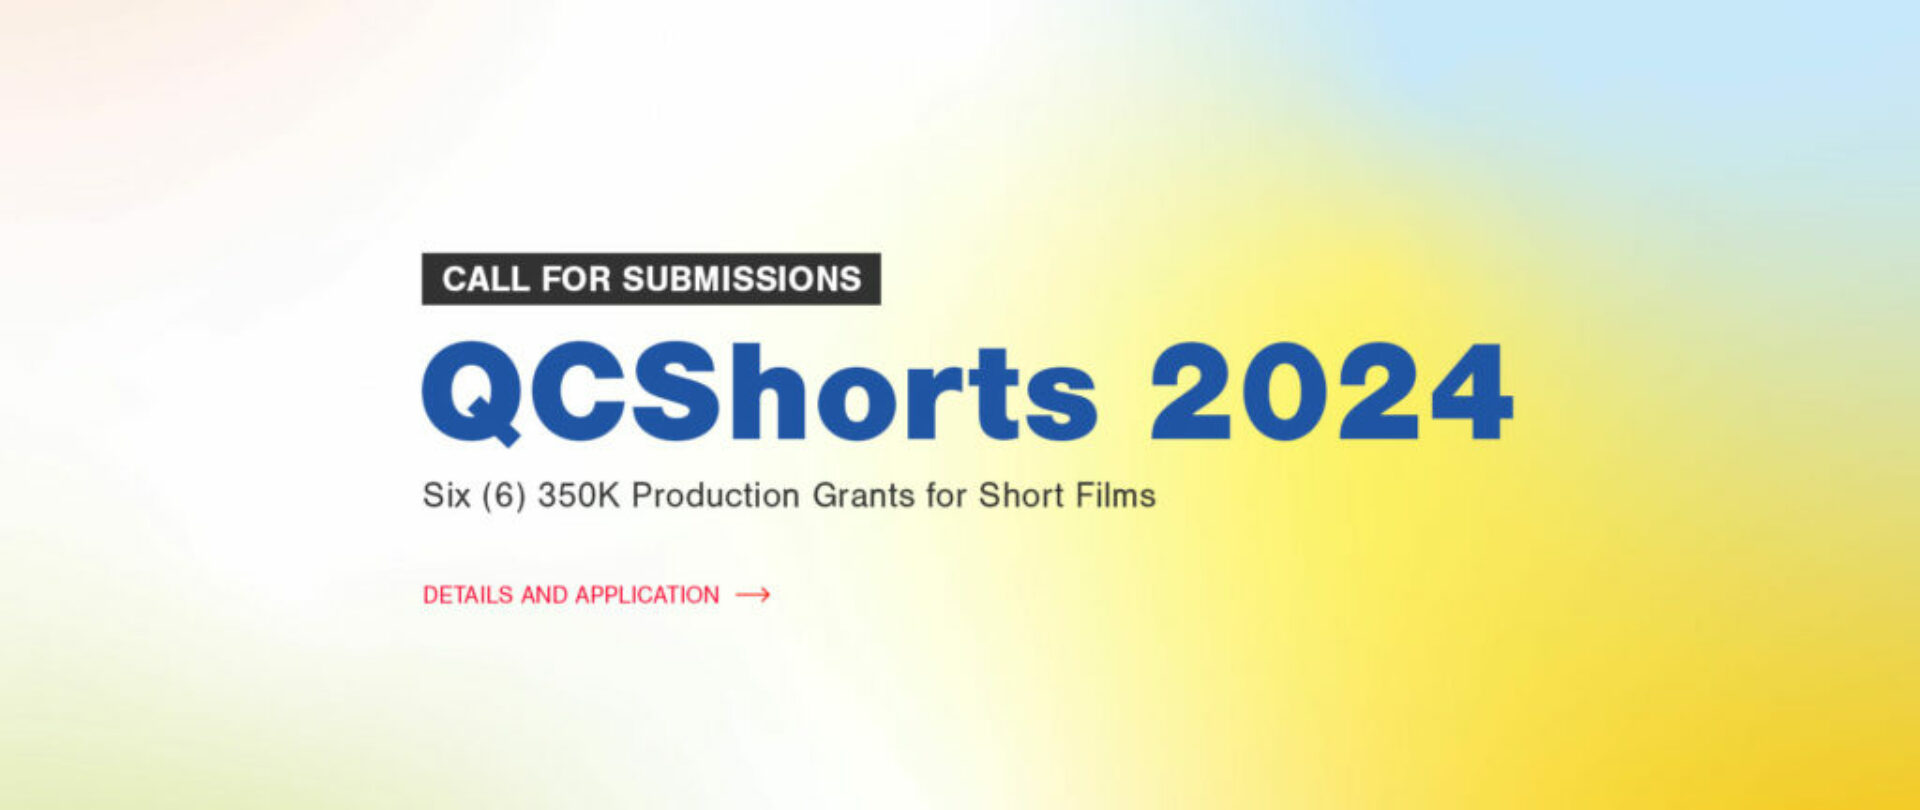 Call for Submissions: QCShorts 2024